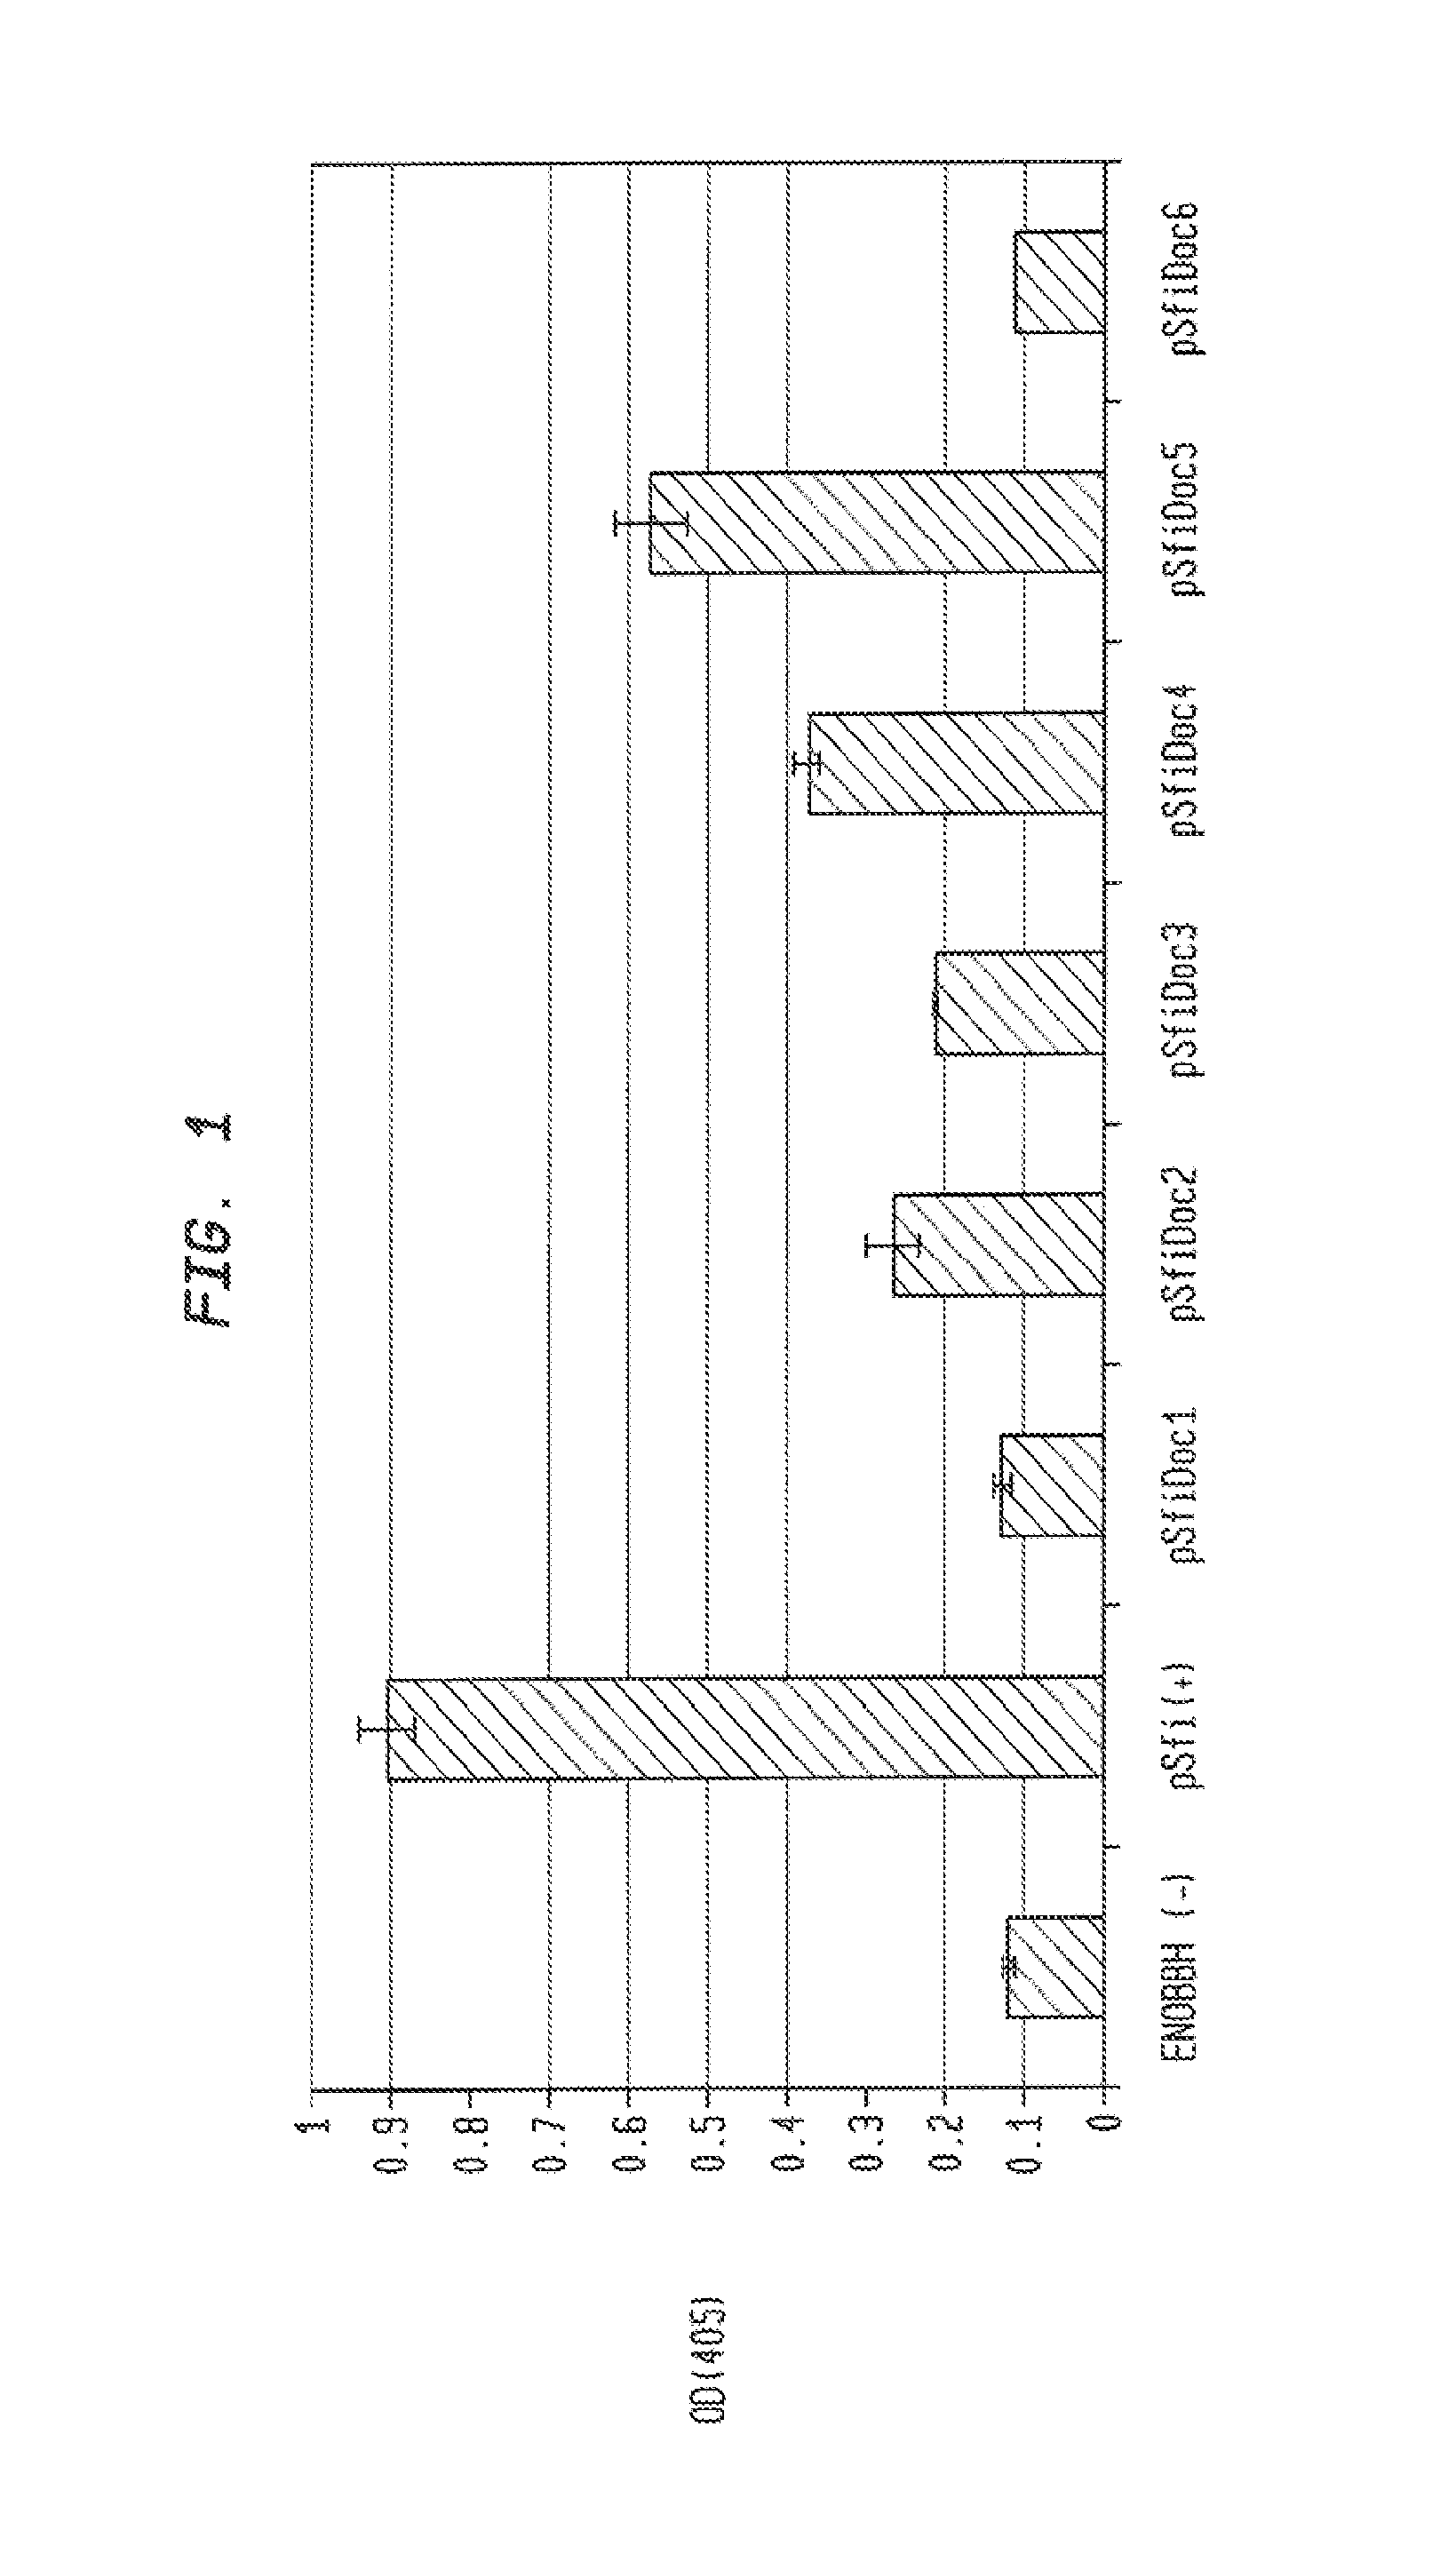 Yeast cells expressing an exogenous cellulosome and methods of using the same